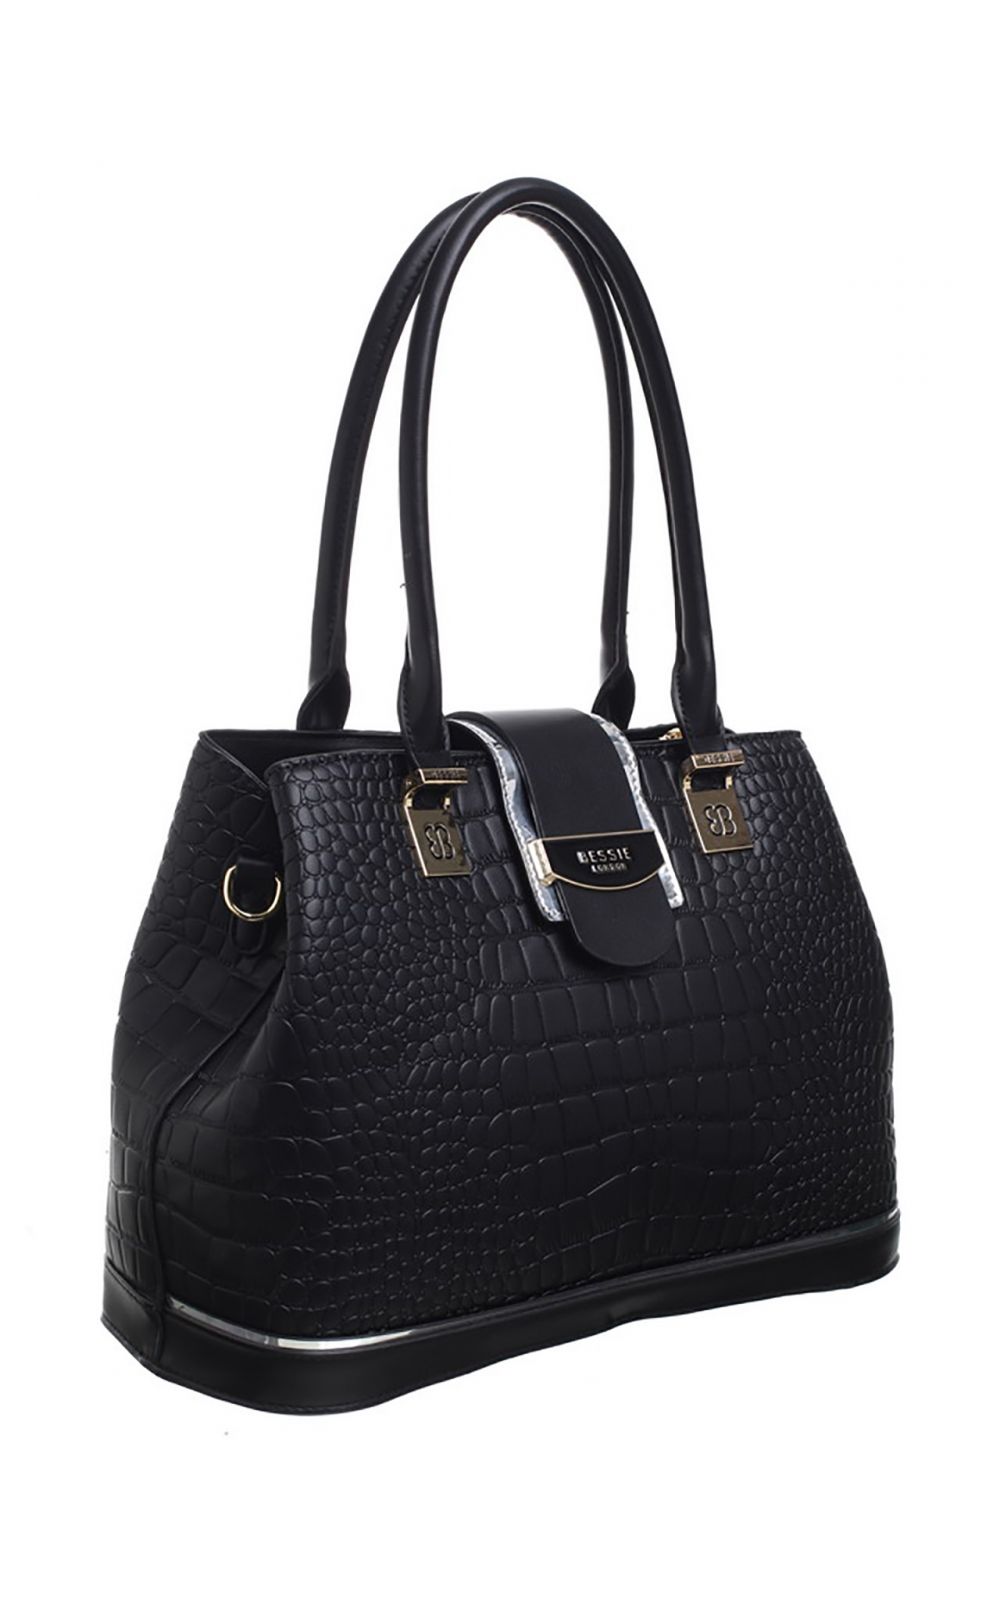 Women's BESSIE Croc Print Tote and Shoulder Bags BW5643 - Black